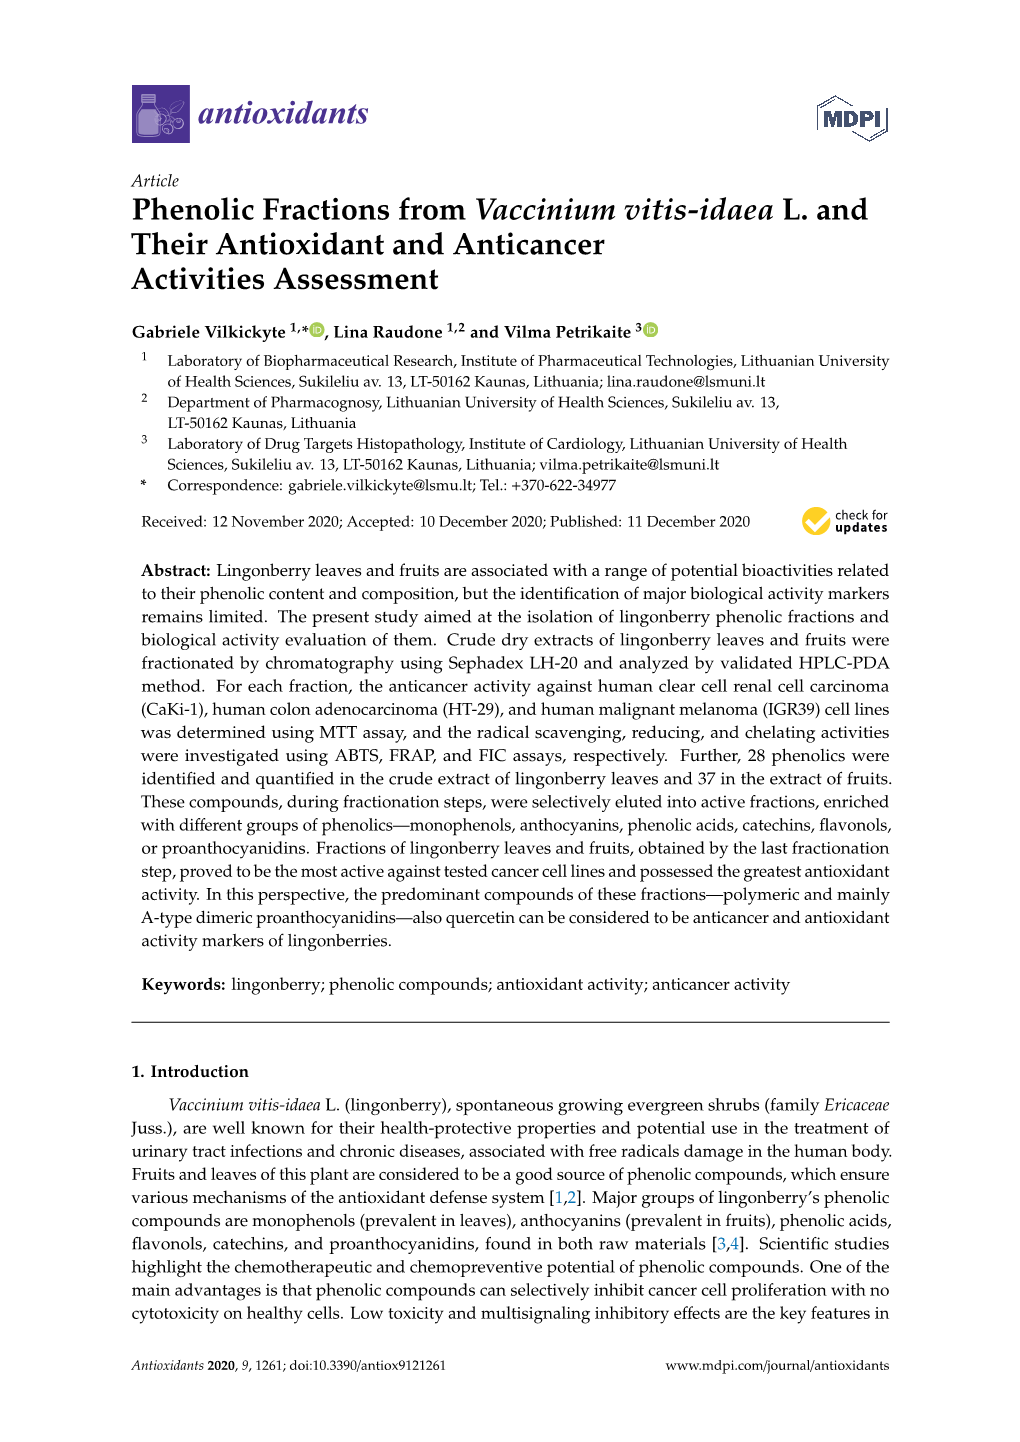 Phenolic Fractions from Vaccinium Vitis-Idaea L. and Their Antioxidant and Anticancer Activities Assessment